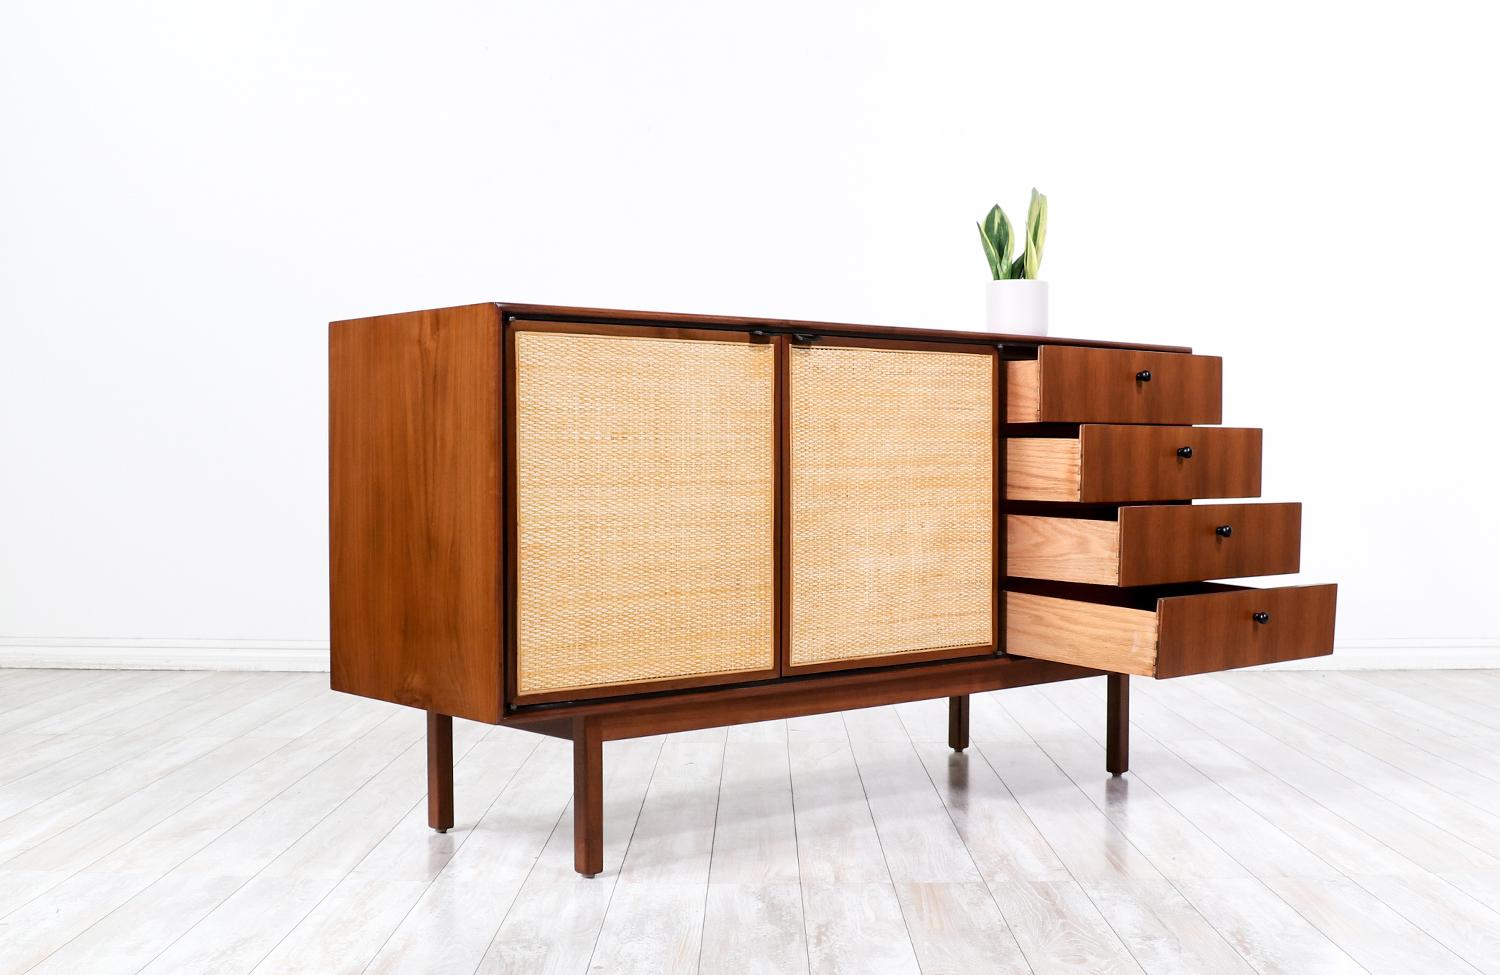 Late 20th Century Mid-Century Modern Walnut & Cane Credenza by Jack Cartwright for Founders